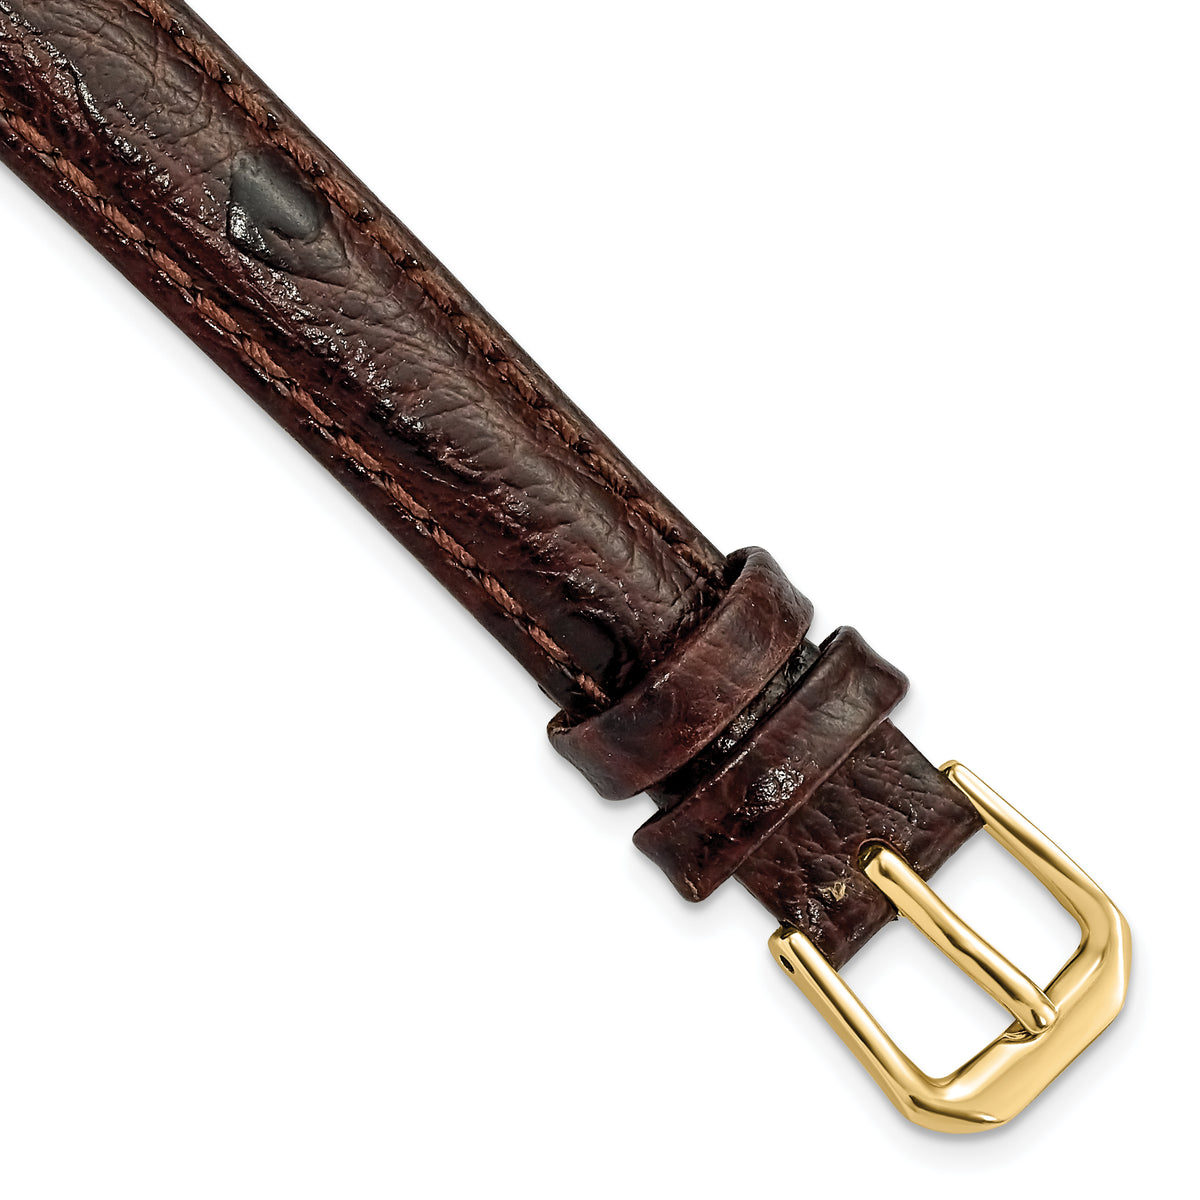 DeBeer 12mm Brown Ostrich Grain Leather with Gold-tone Buckle 6.75 inch Watch Band